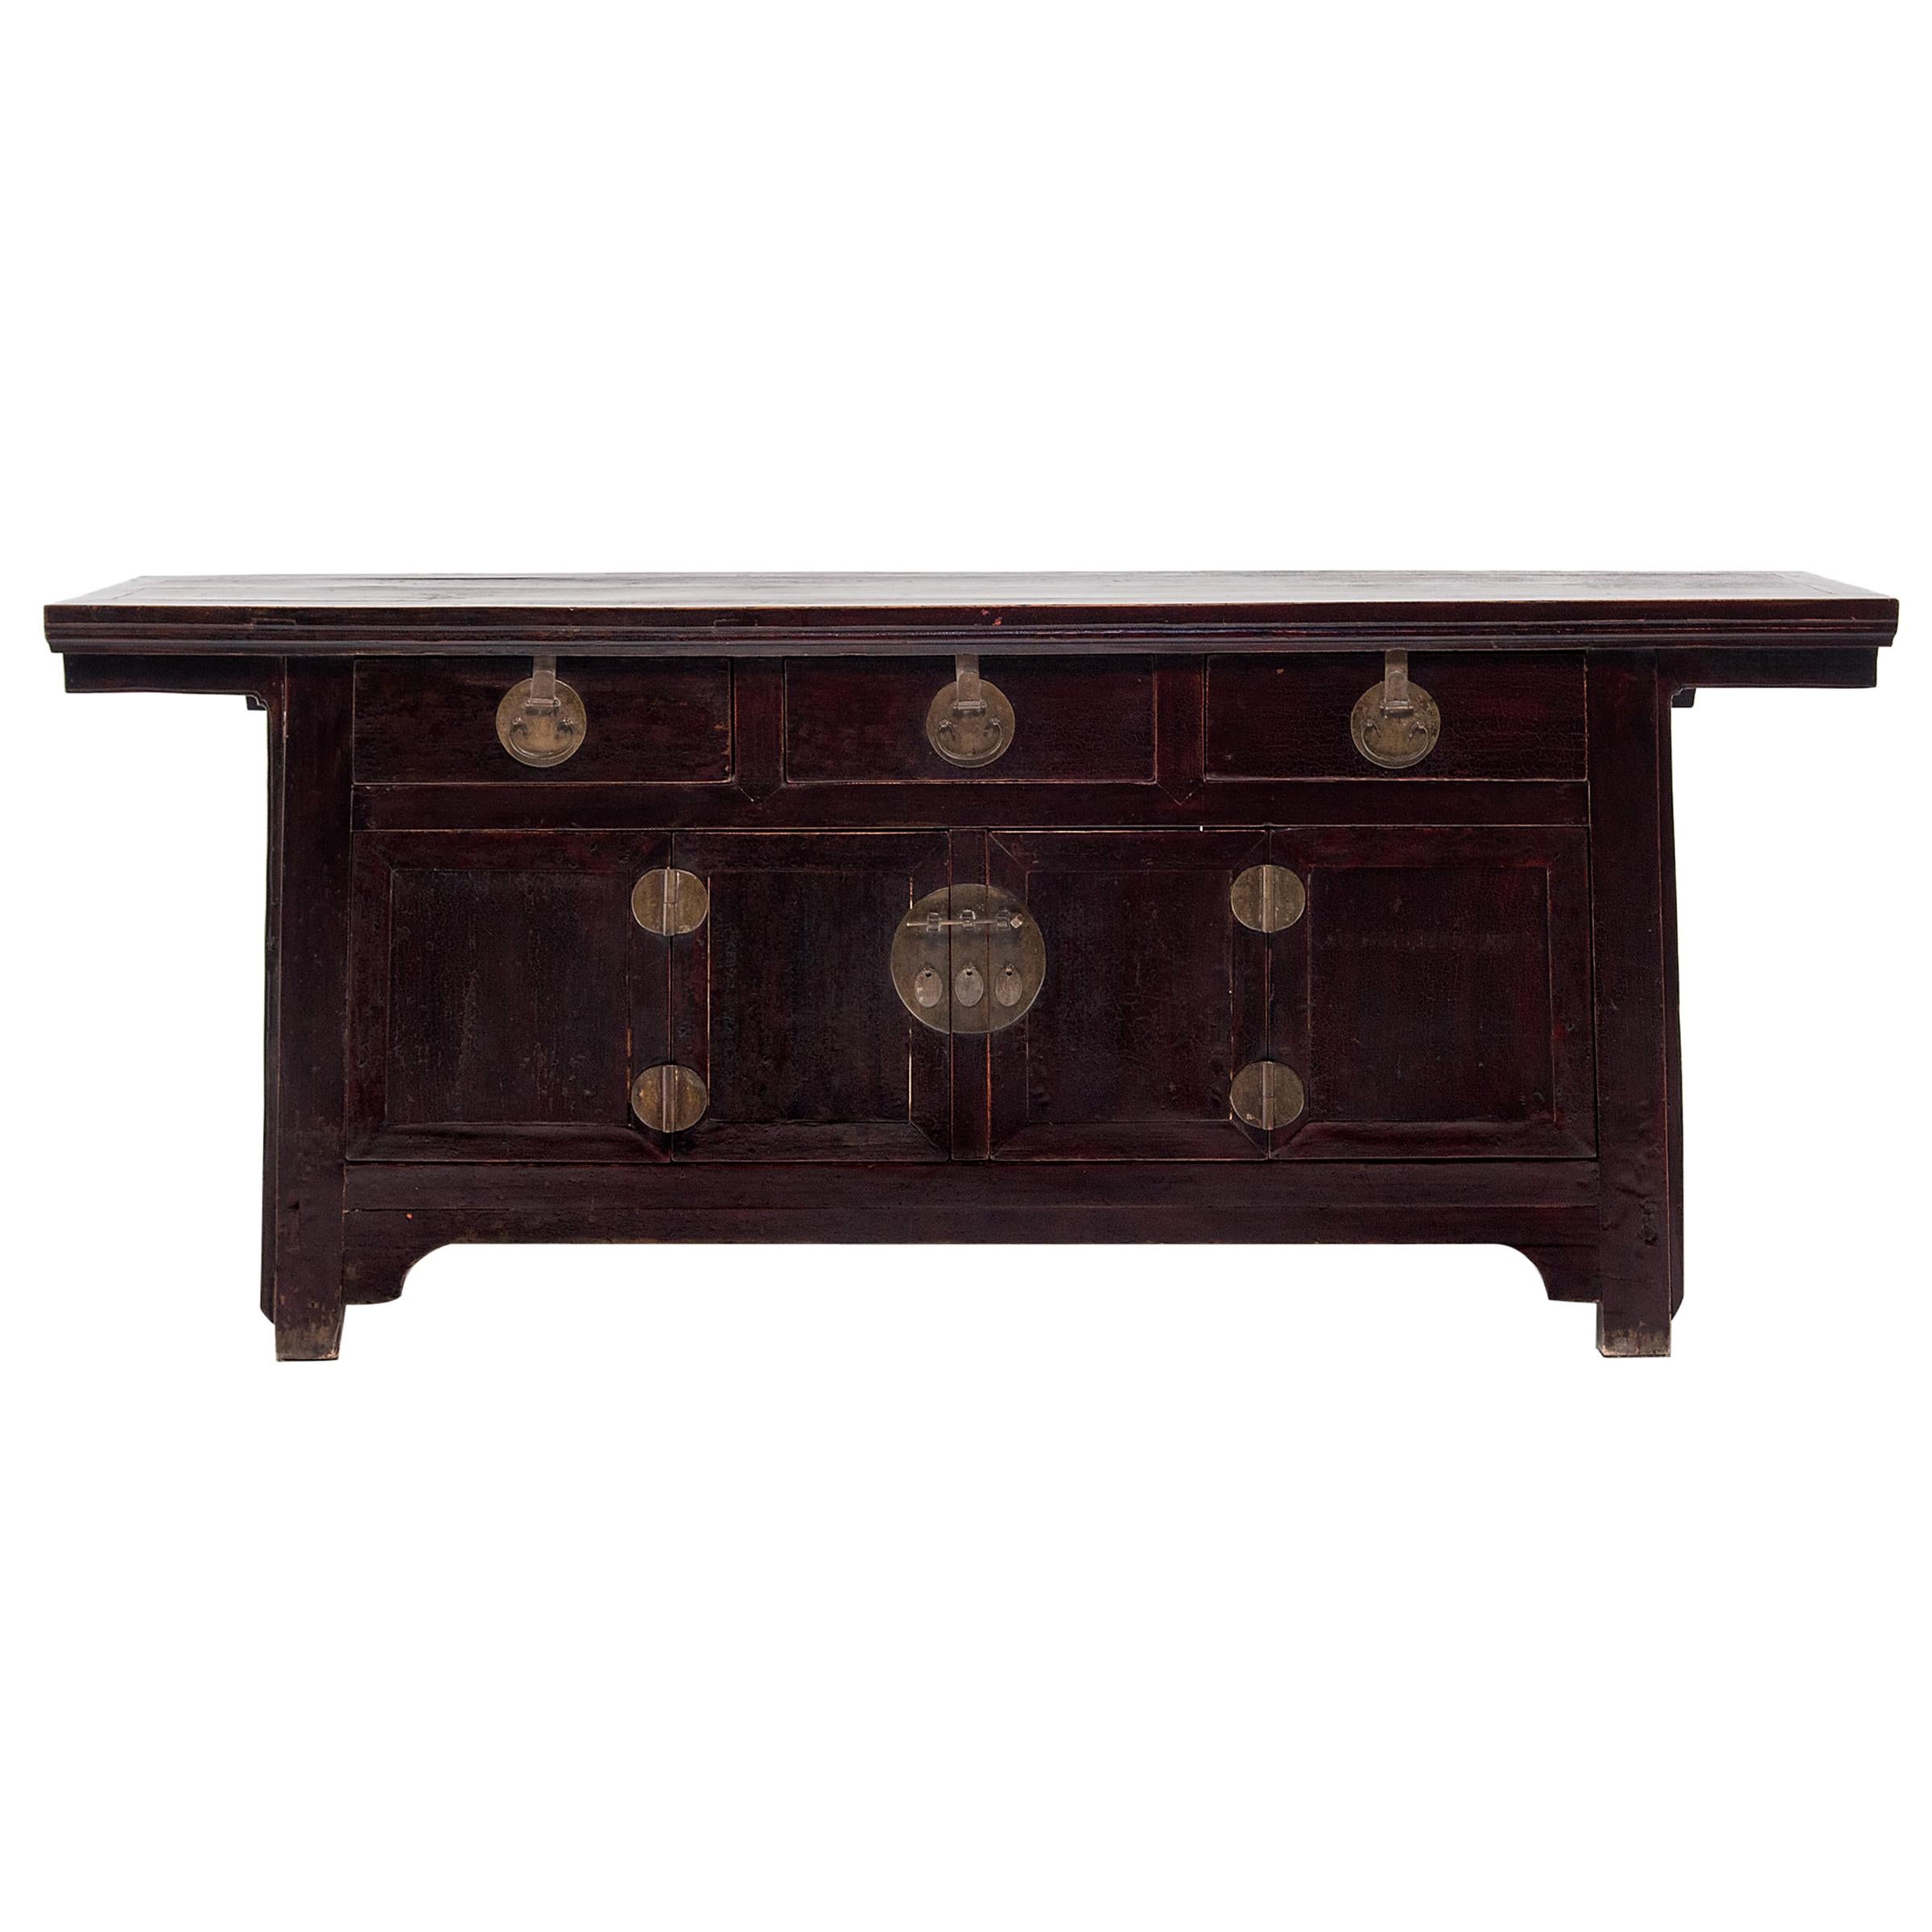 Chinese Crackled Lacquer Three-Drawer Coffer, circa 1850